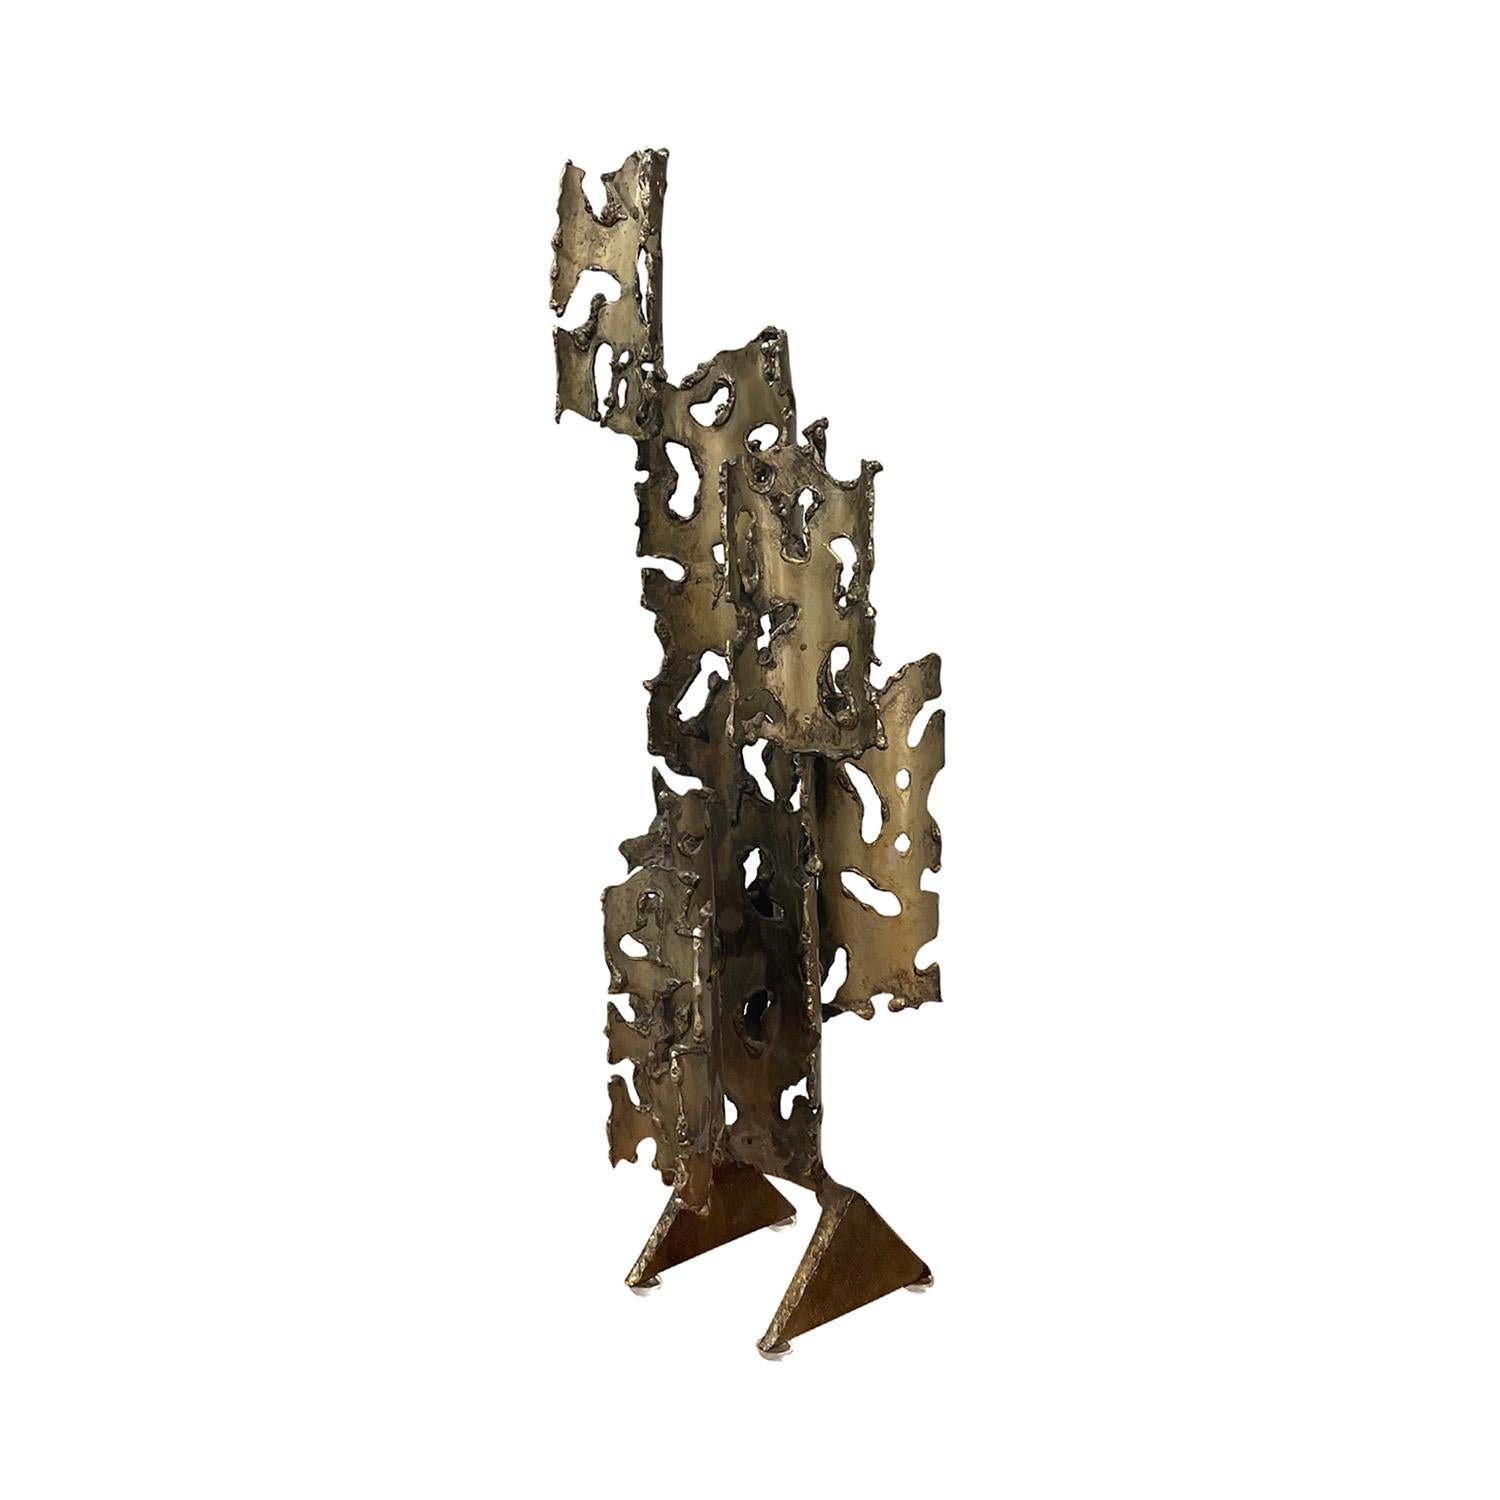 20th Century Italian Brutalist Metal Sculpture - Vintage Abstract Décor Piece In Good Condition For Sale In West Palm Beach, FL